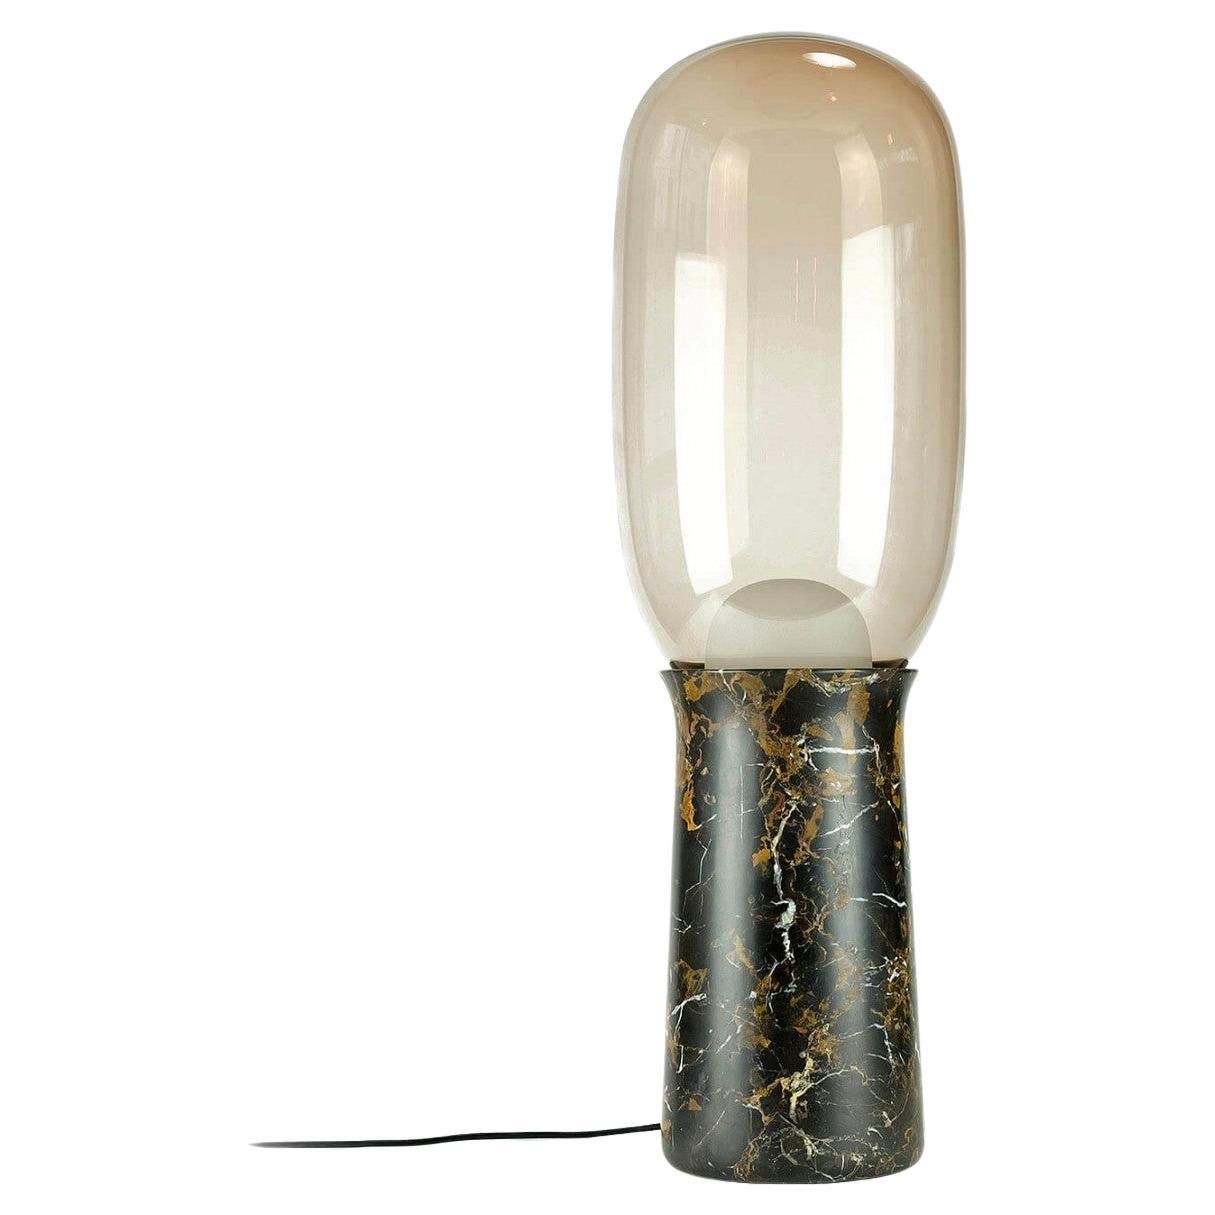 Contemporary Marble Floor Lamp, Torch by Dan Yeffet for Collection Particuliere